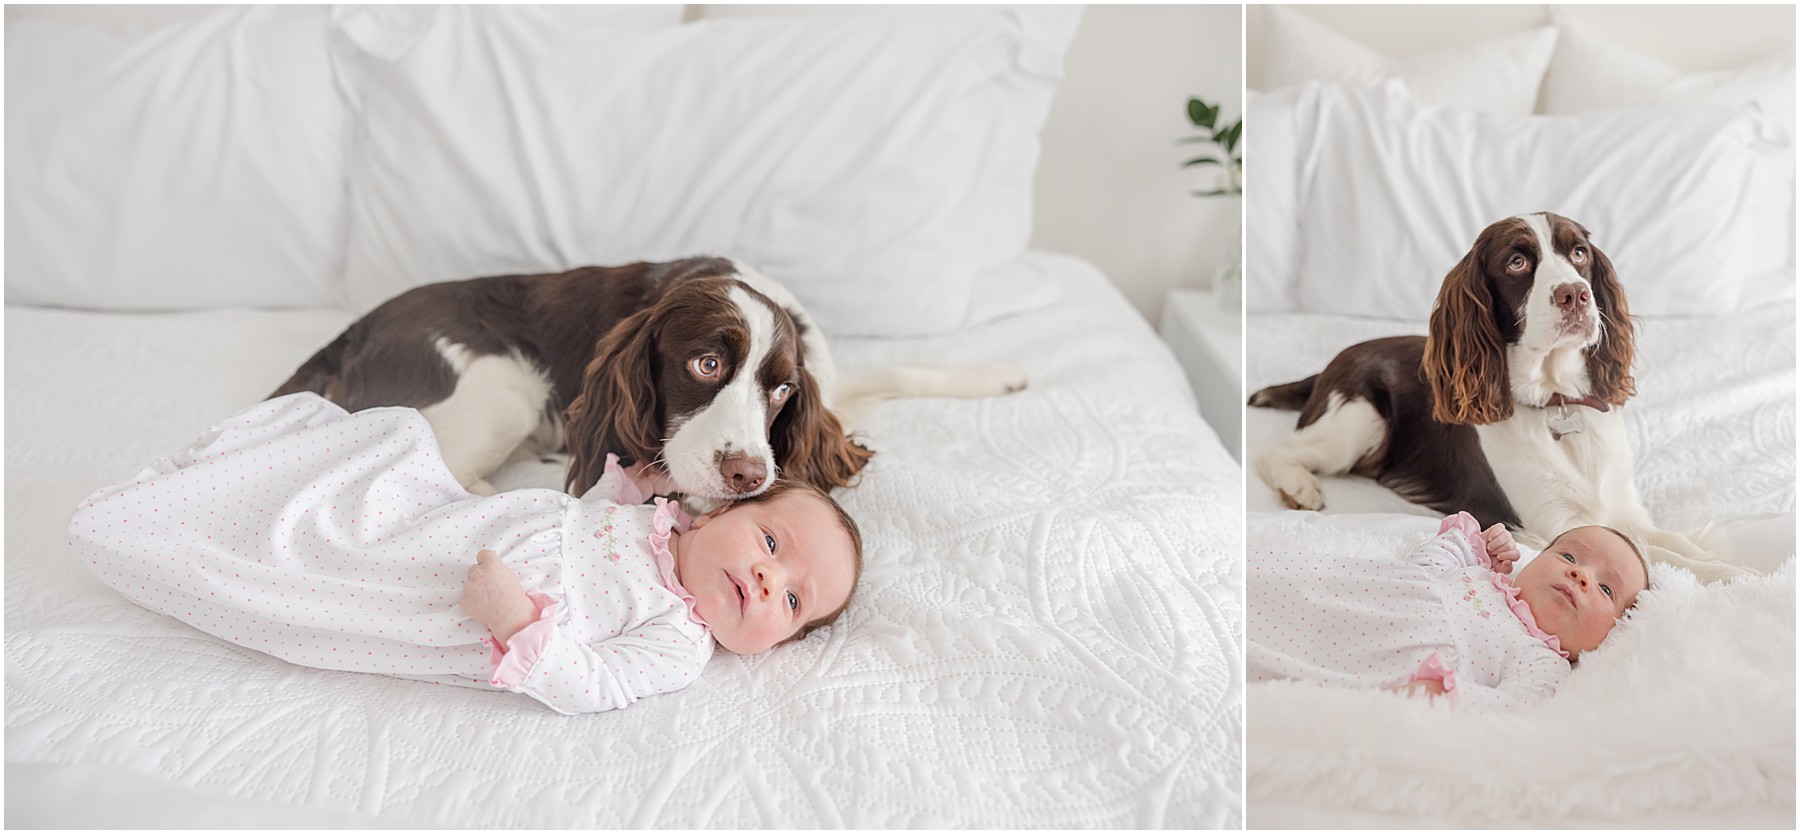 A dog posed with a newborn baby girl on a white bed.